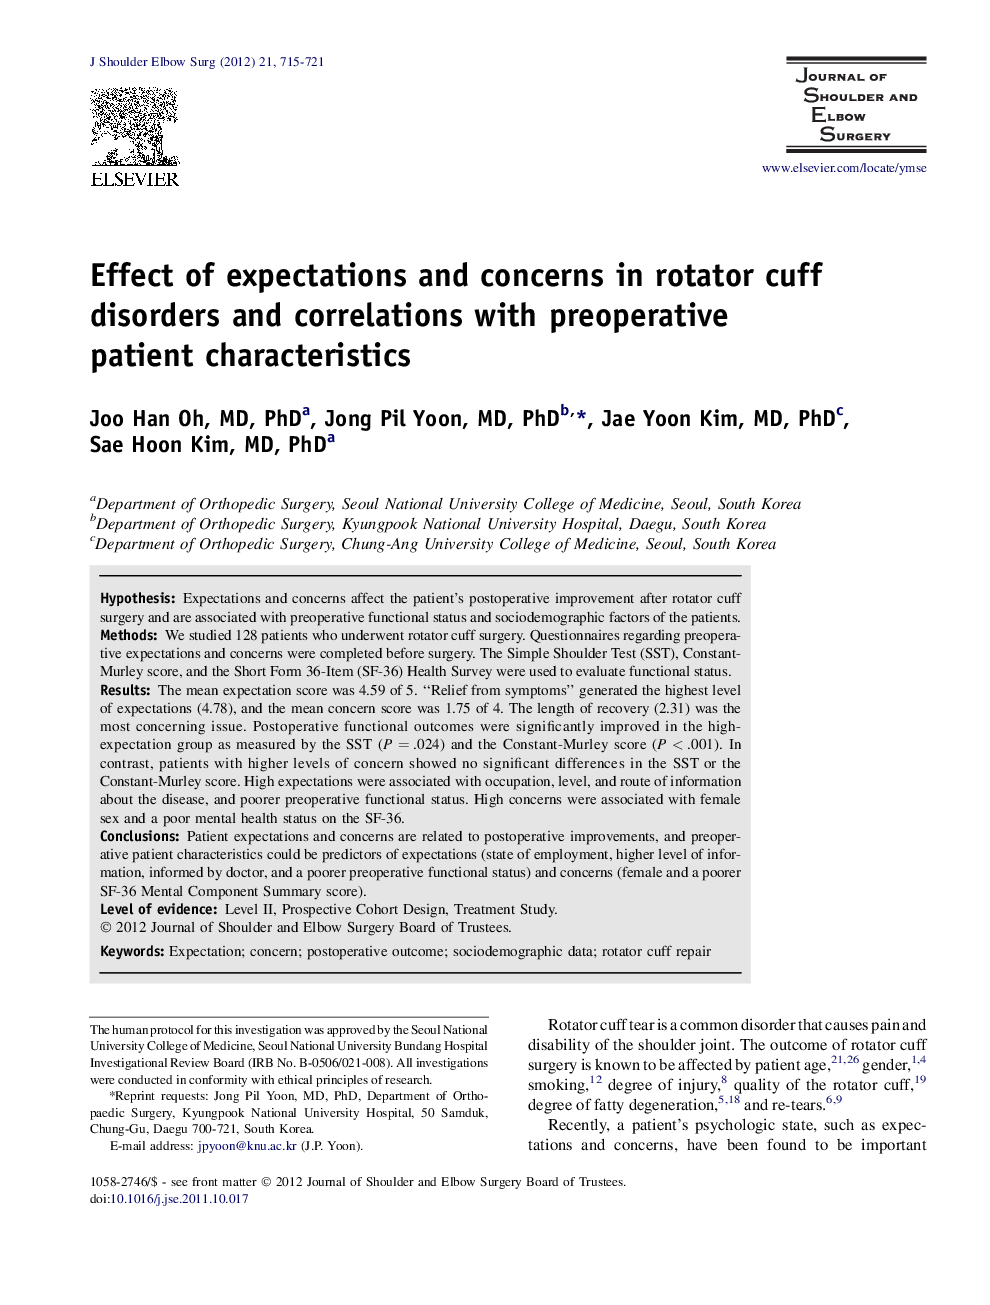 Effect of expectations and concerns in rotator cuff disorders and correlations with preoperative patient characteristics 